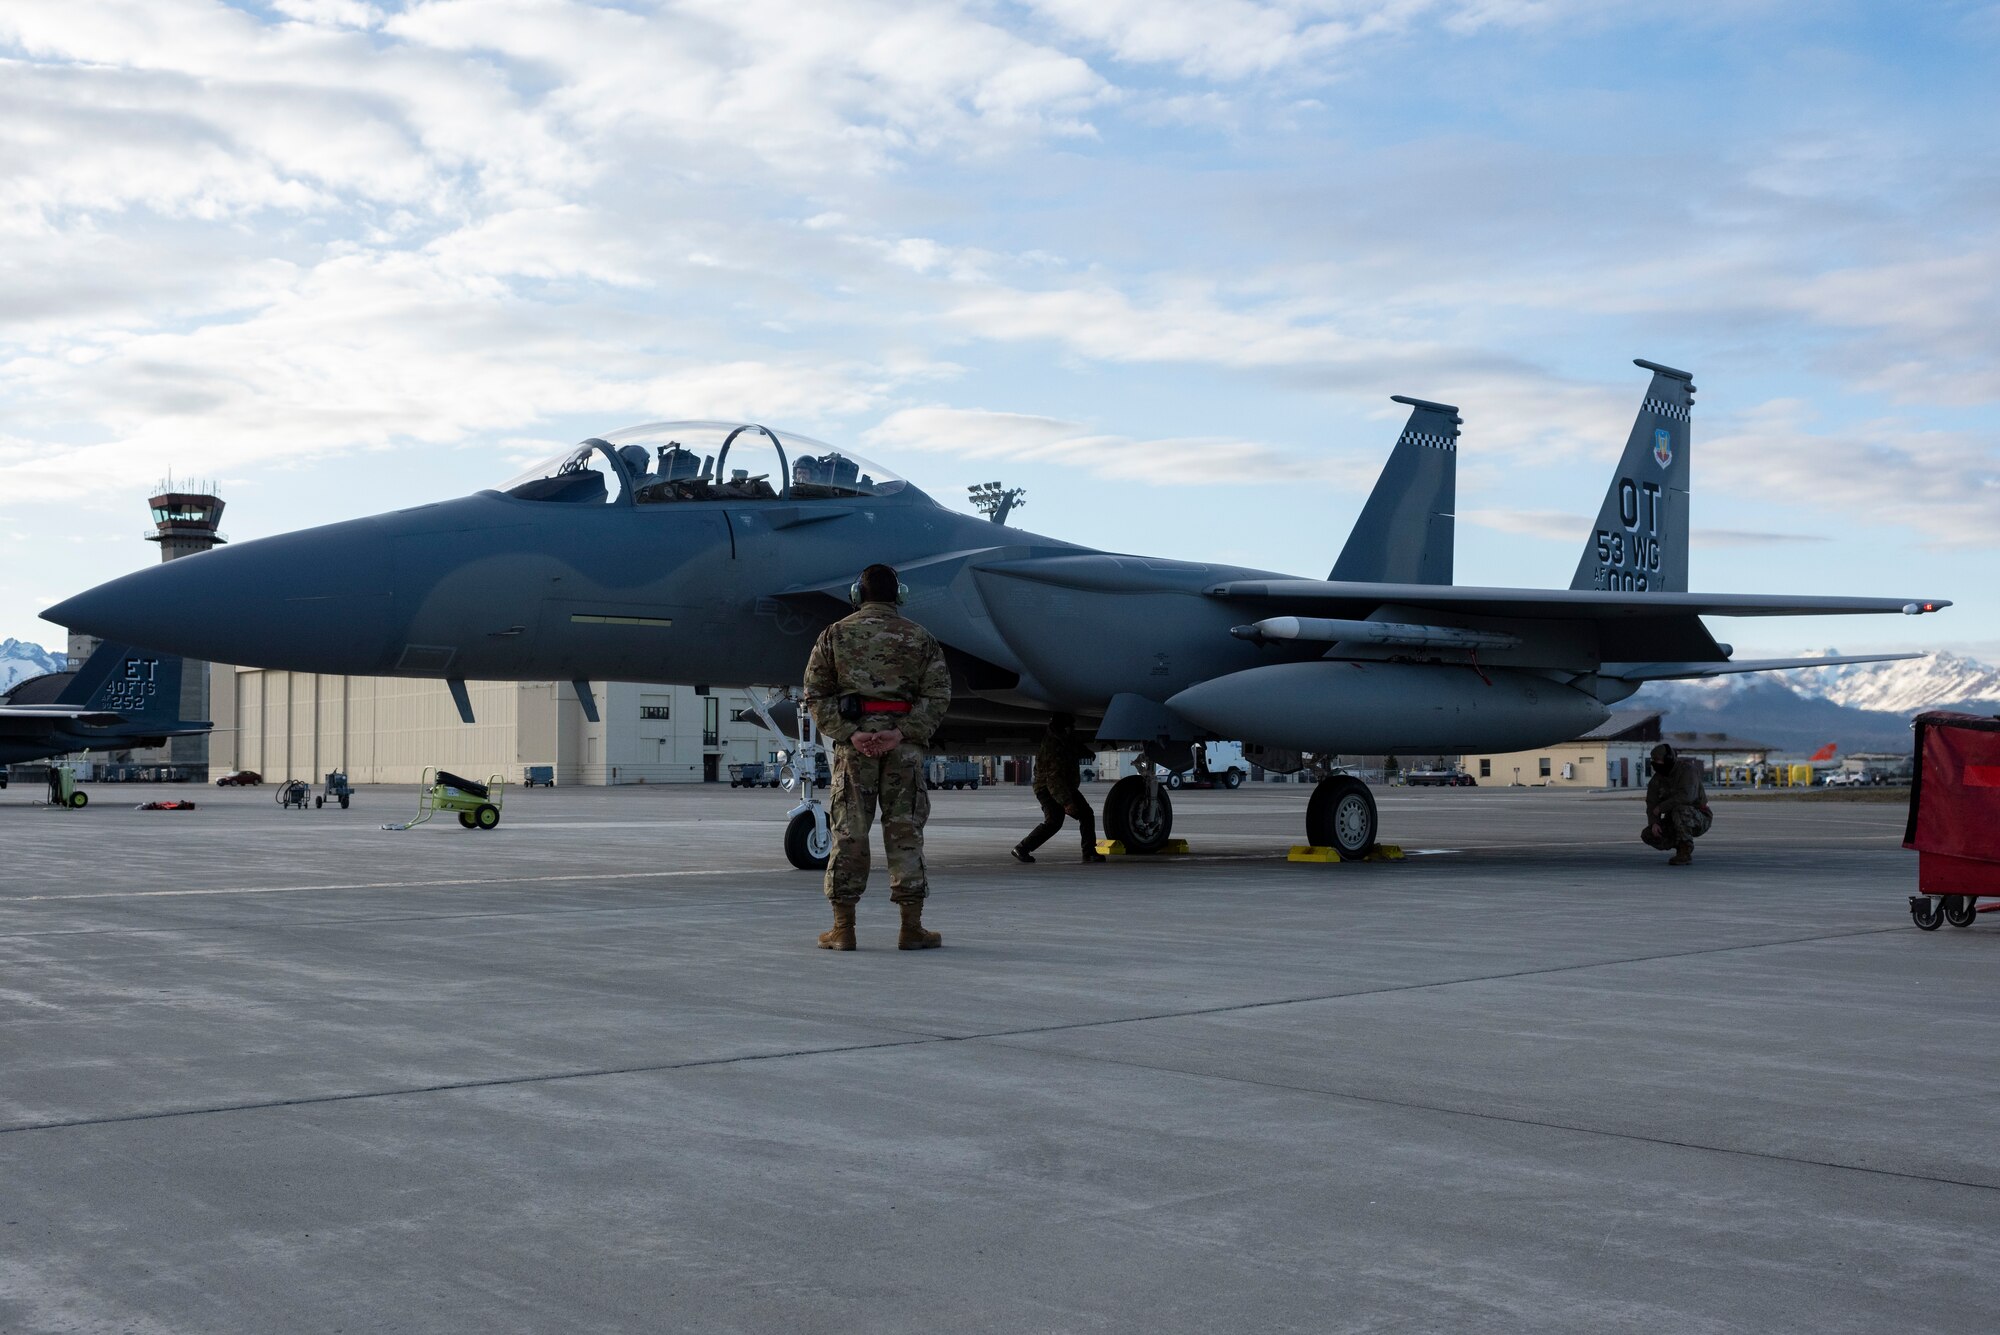 Airmen assigned to the 53rd Wing out of Eglin Air Force Base, Fla., prepare to launch an F-15EX Eagle in support of Northern Edge 21 at Joint Base Elmendorf-Richardson, Alaska, May 12, 2021. Approximately 15,000 U.S. service members participate in a joint training exercise hosted by U.S. Pacific Air Forces May 3-14, 2021, on and above the Joint Pacific Alaska Range Complex, the Gulf of Alaska, and temporary maritime activities area. NE21 is one in a series of U.S. Indo-Pacific Command exercises designed to sharpen the joint forces' skills, practice tactics, techniques, and procedures, improve command, control, and communication relationships develop cooperative plans and programs. (U.S. Air Force photo by Alejandro Peña)